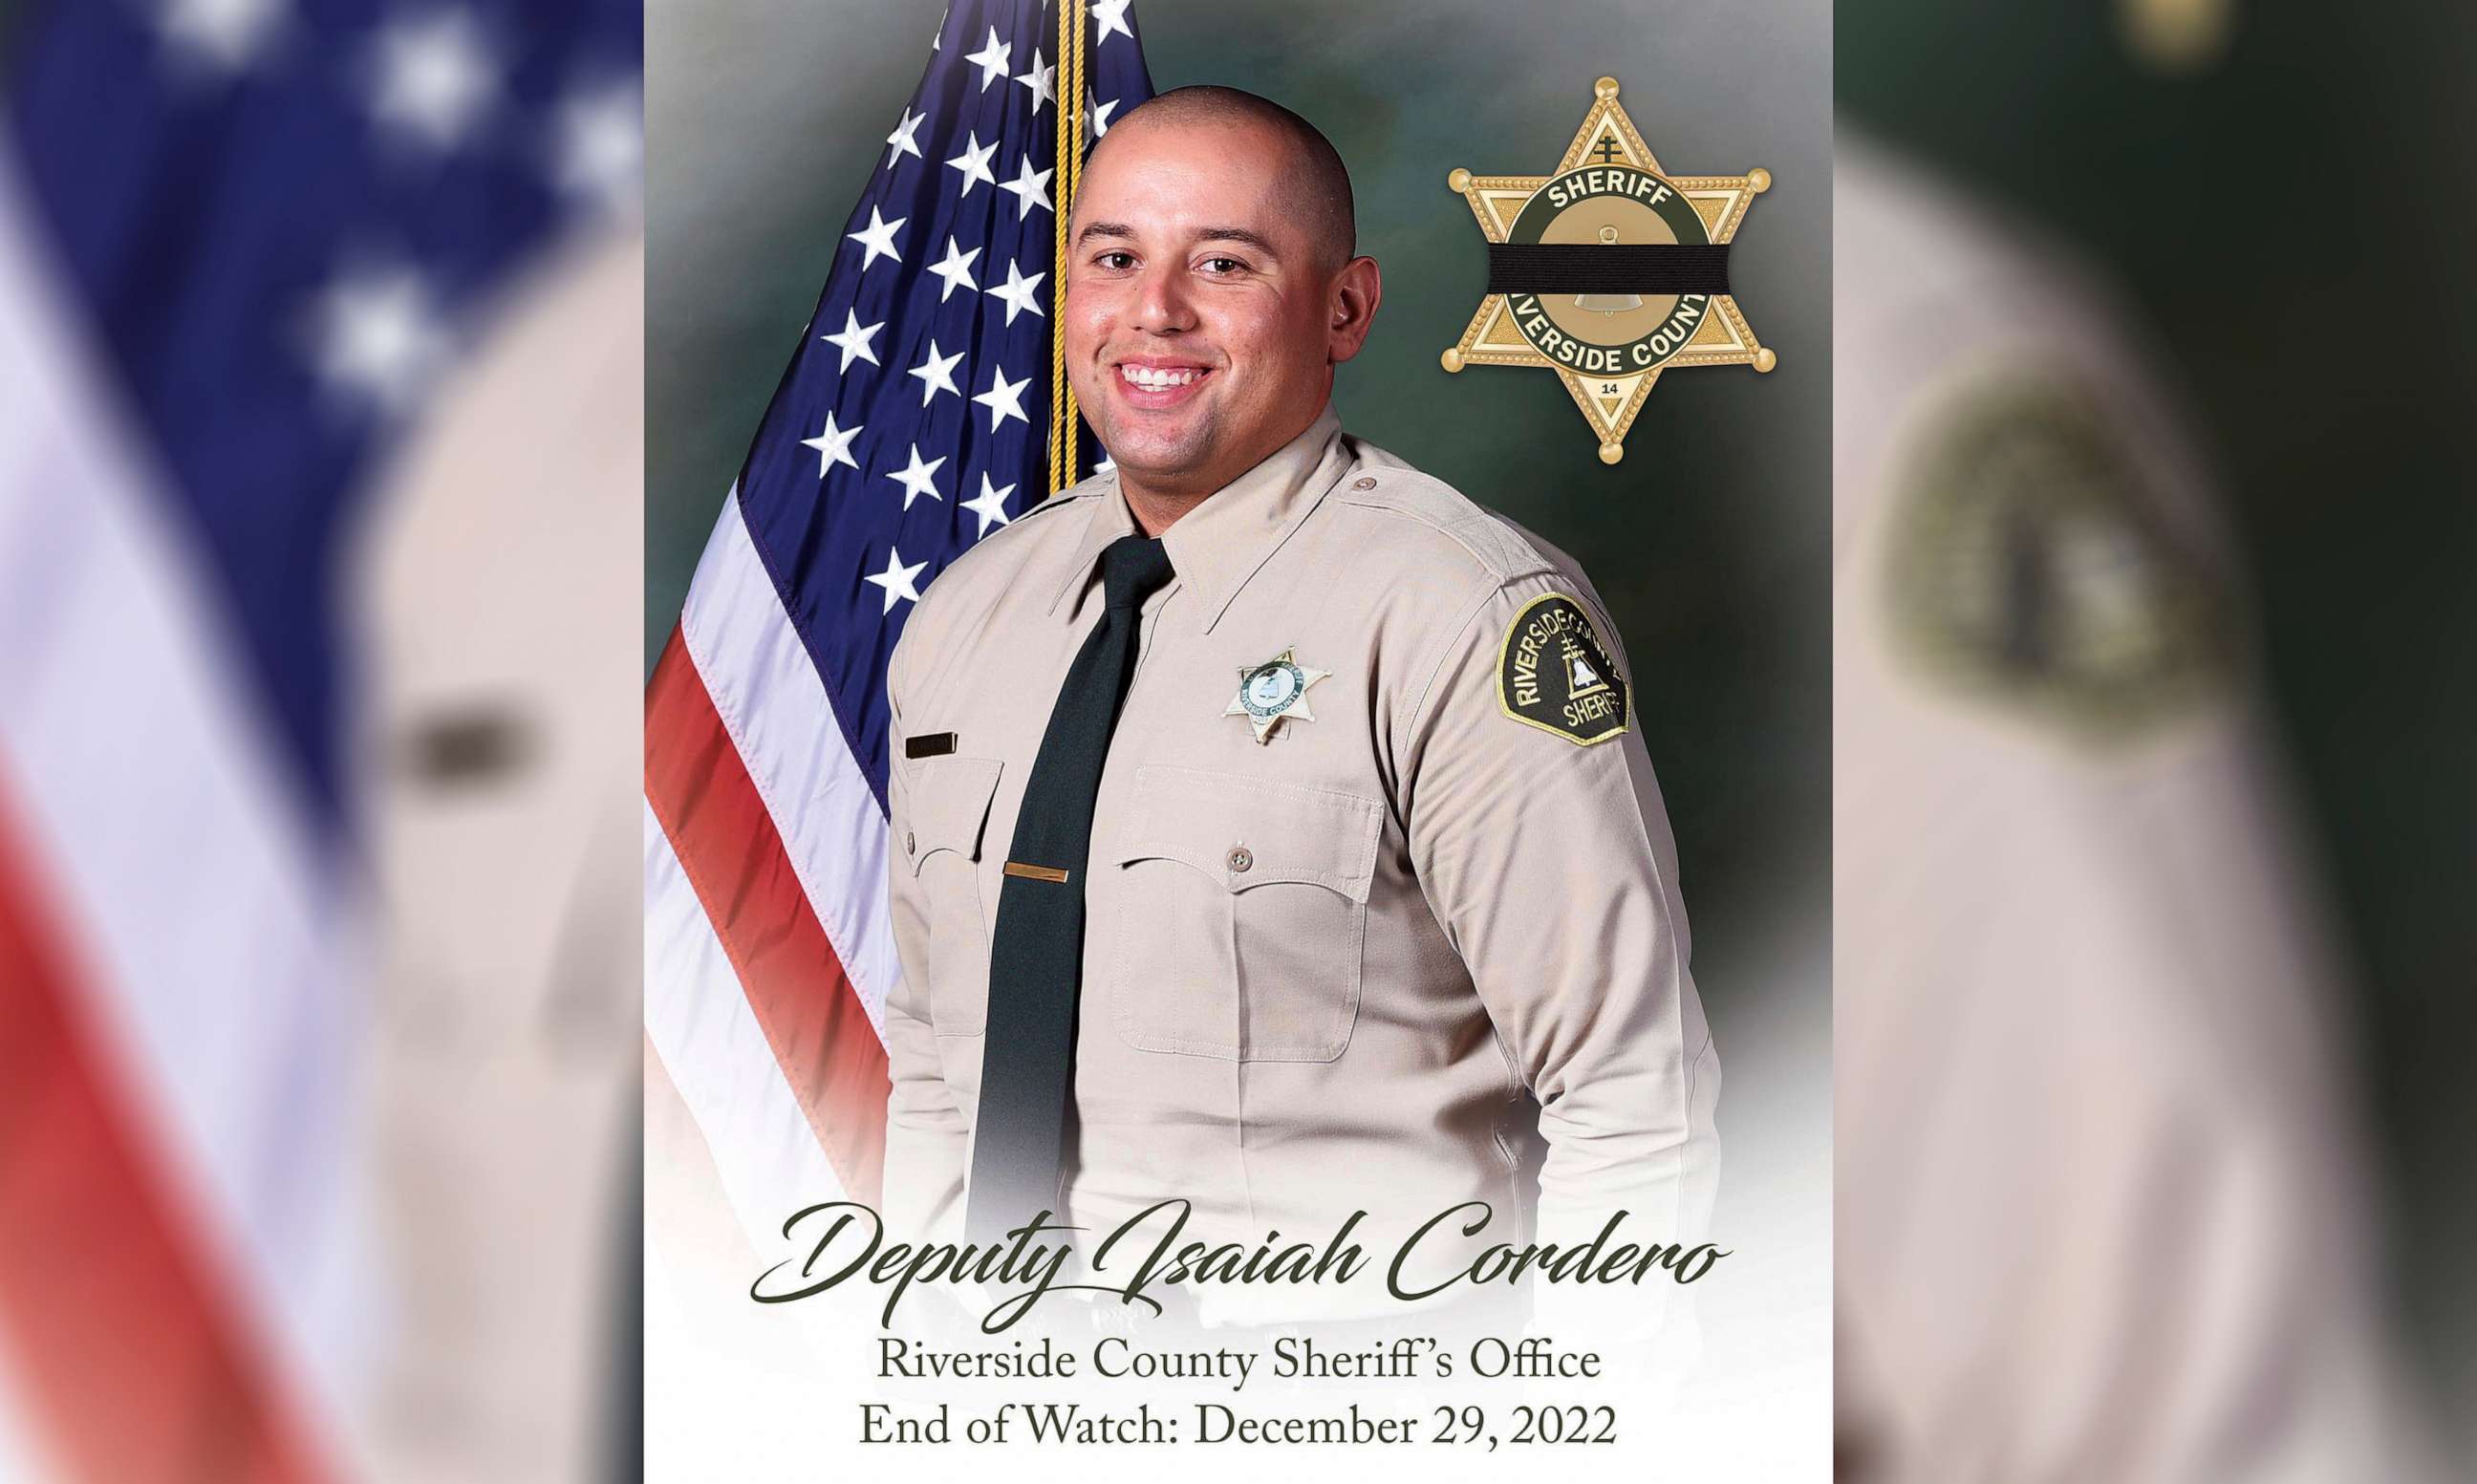 PHOTO: This image provided by the Riverside County Sheriff's Department shows Deputy Isaiah Cordero.